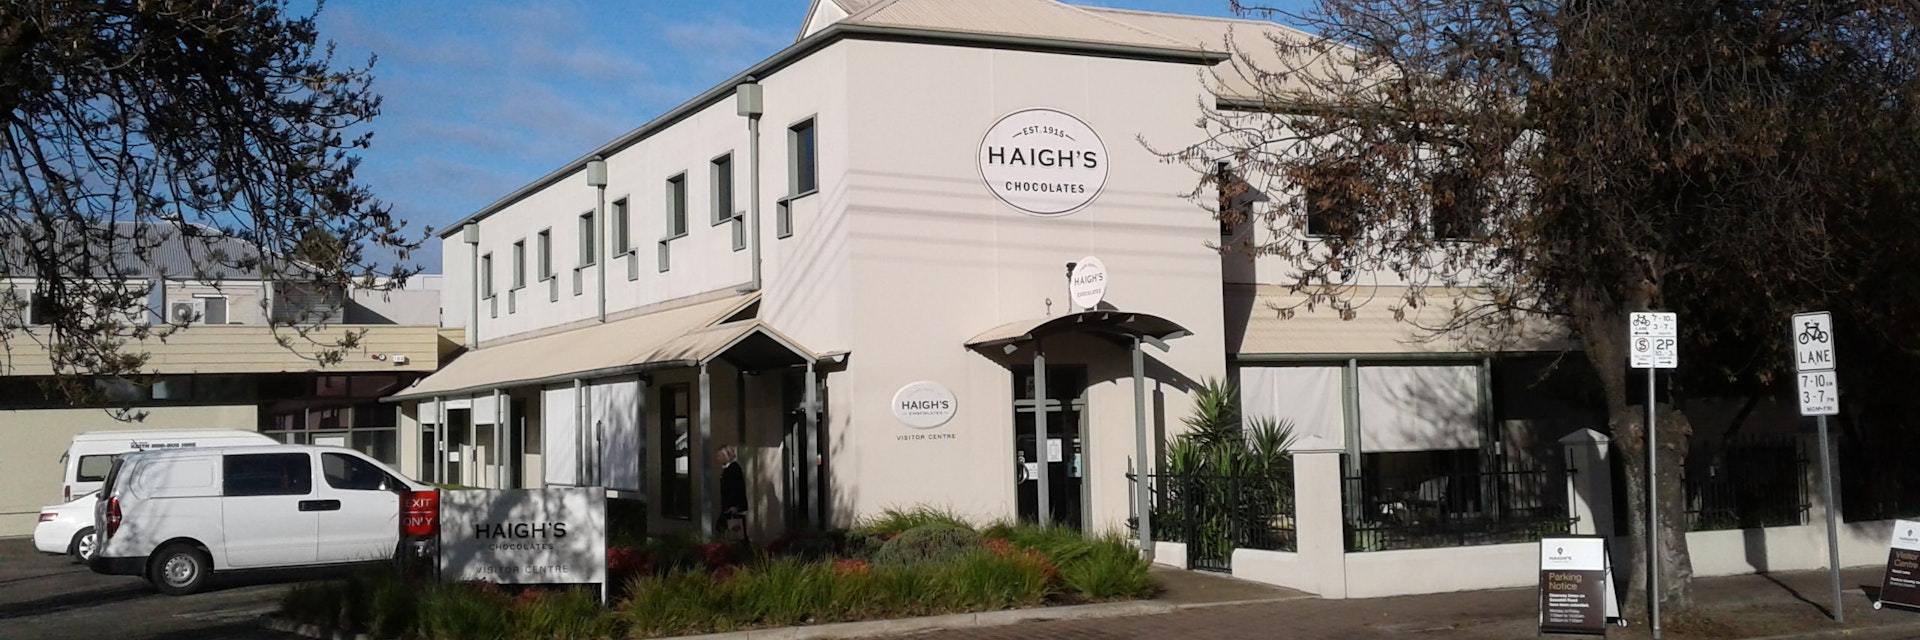 Haigh's Chocolates Visitor Centre